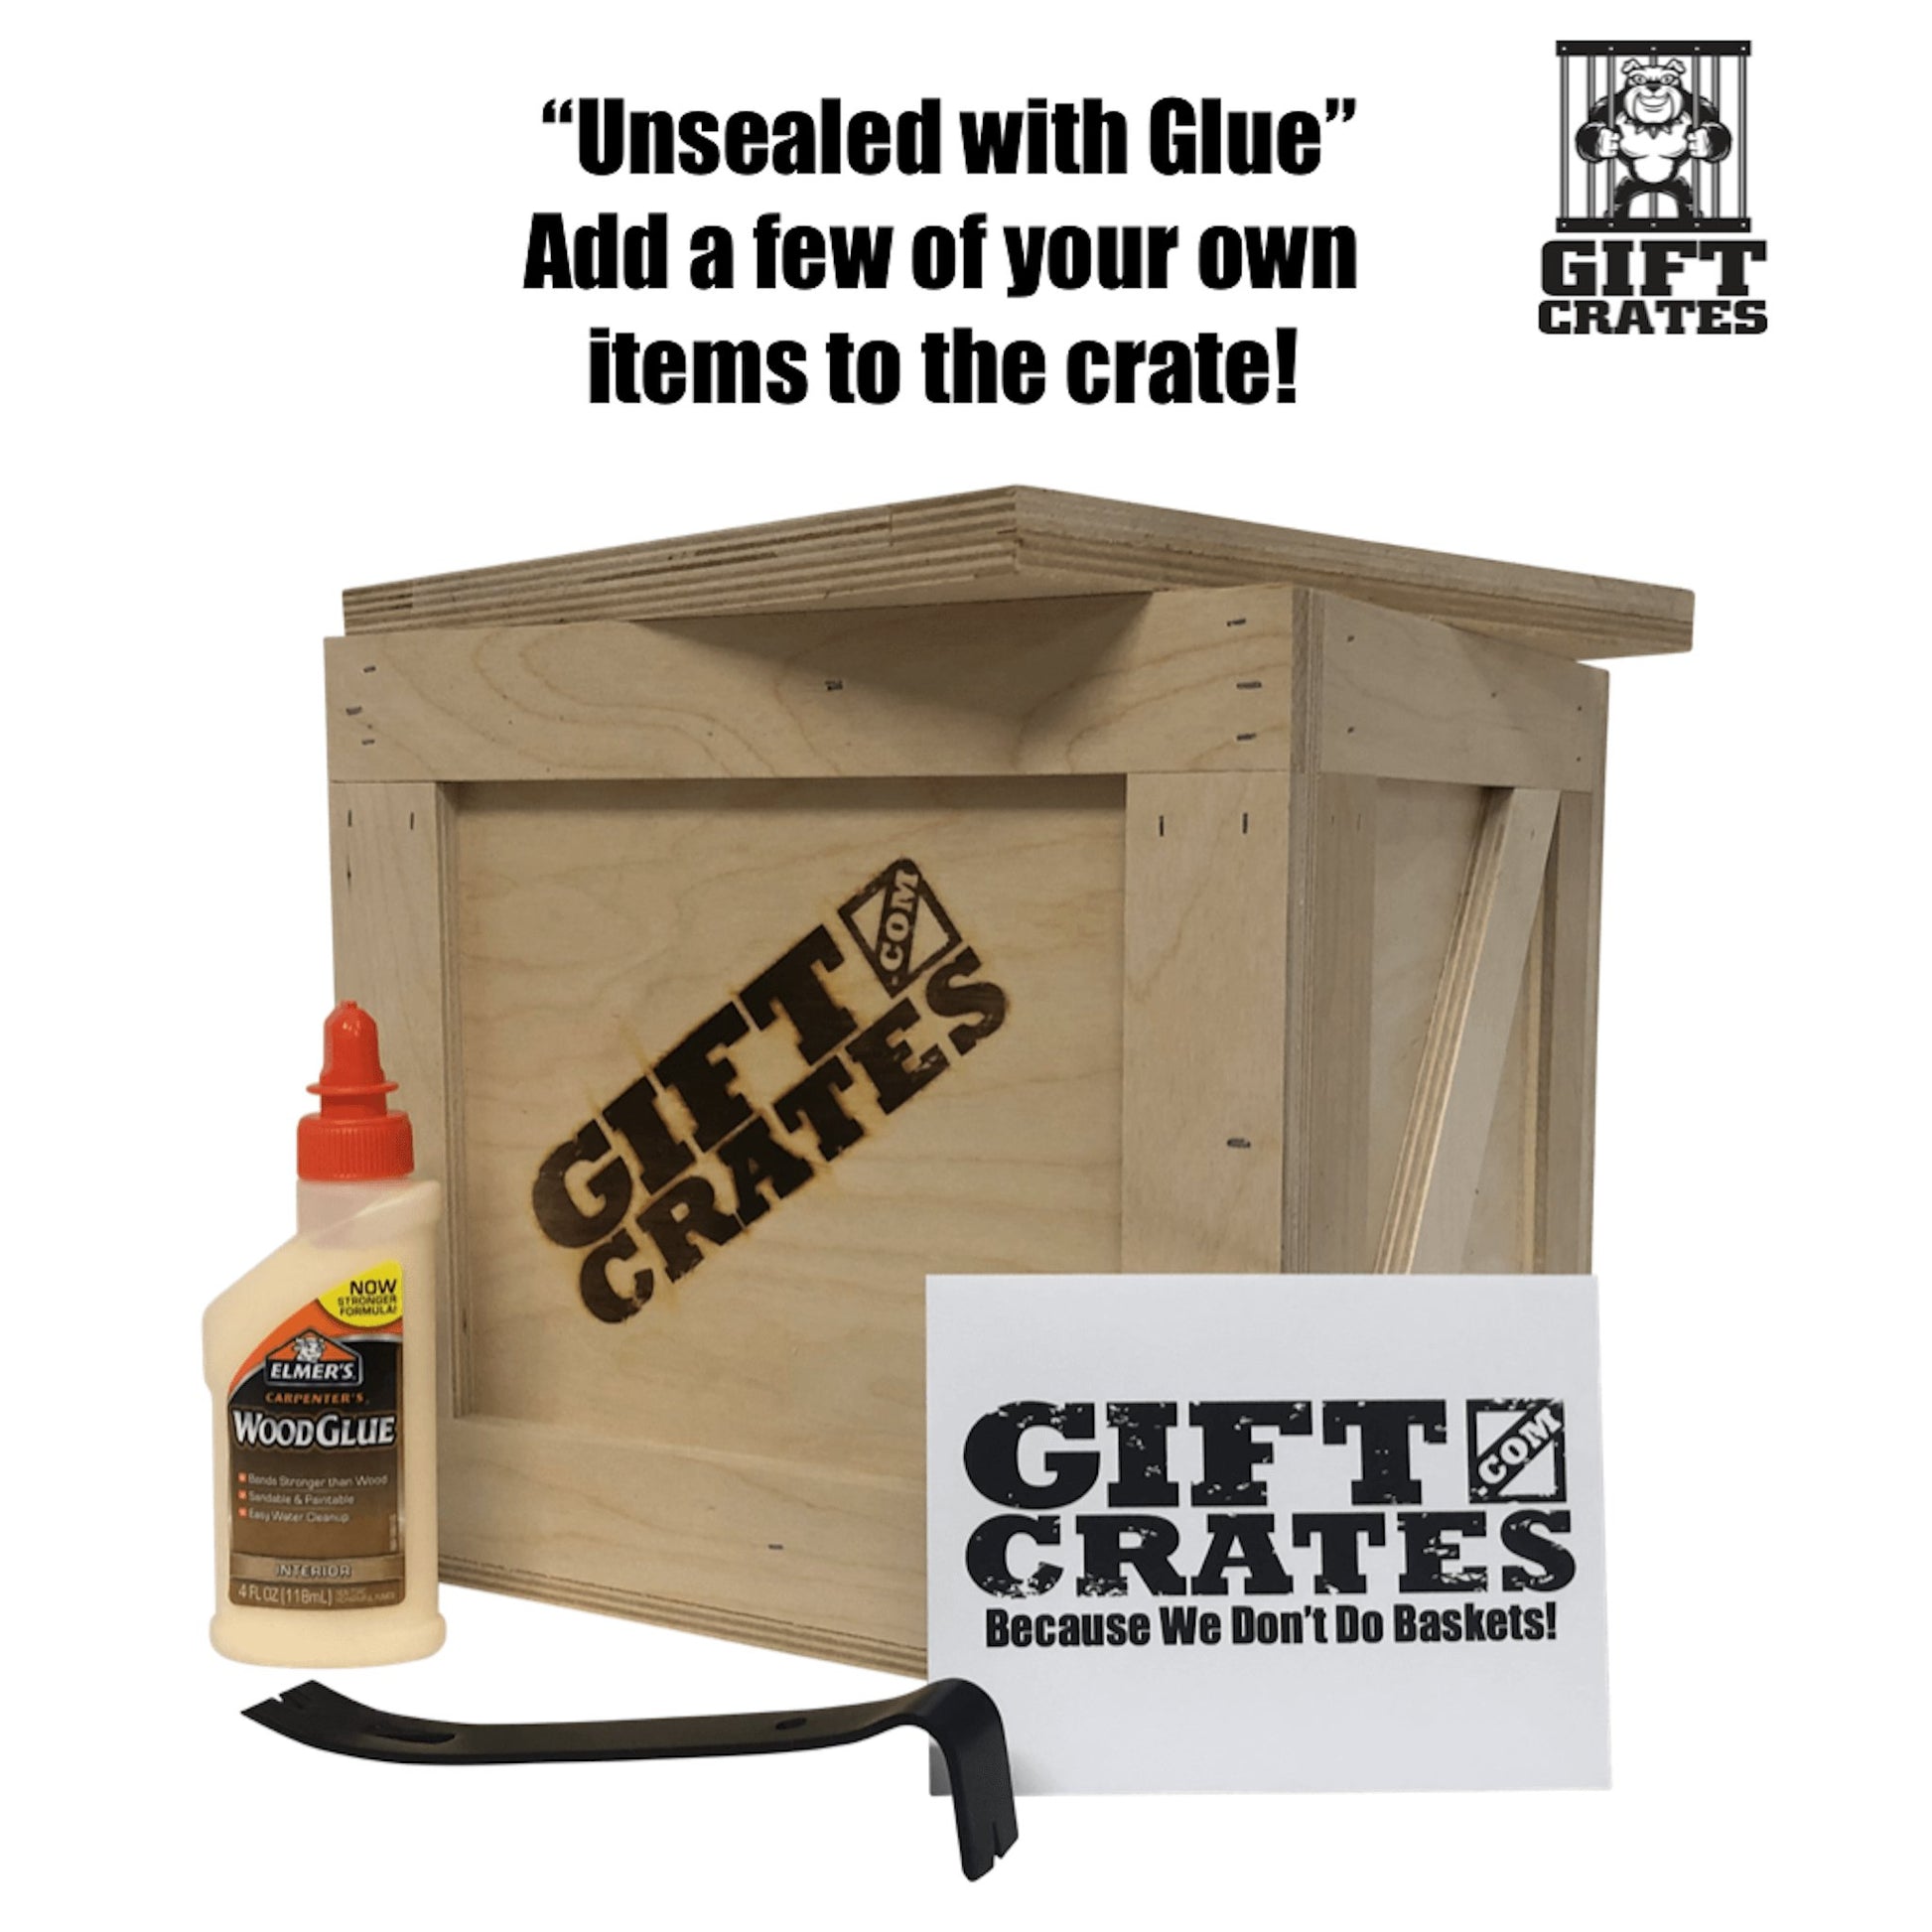 The Coffee Crate - Gift Crates